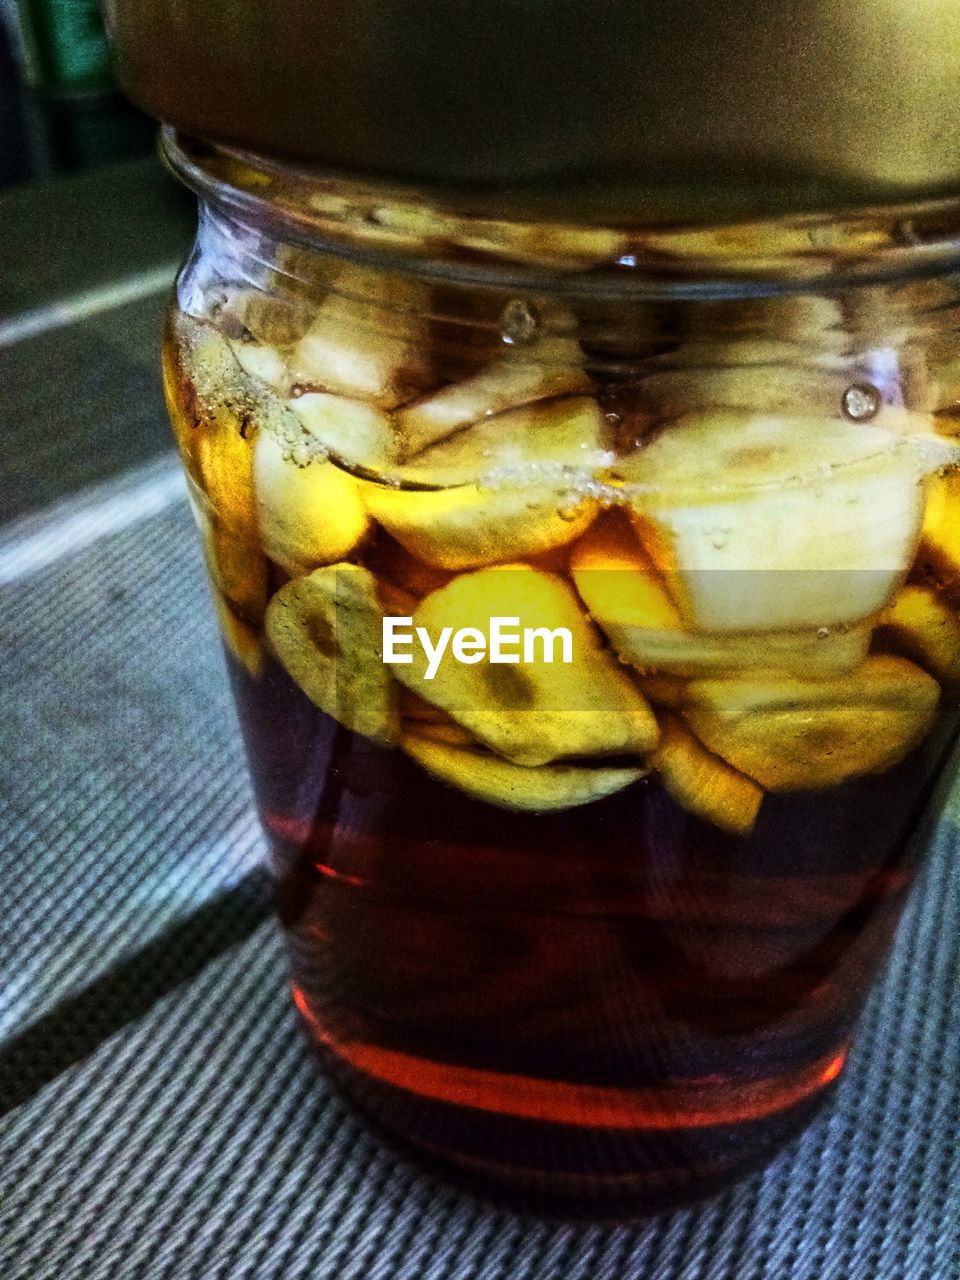 CLOSE-UP OF DRINK IN GLASS JAR ON TABLE